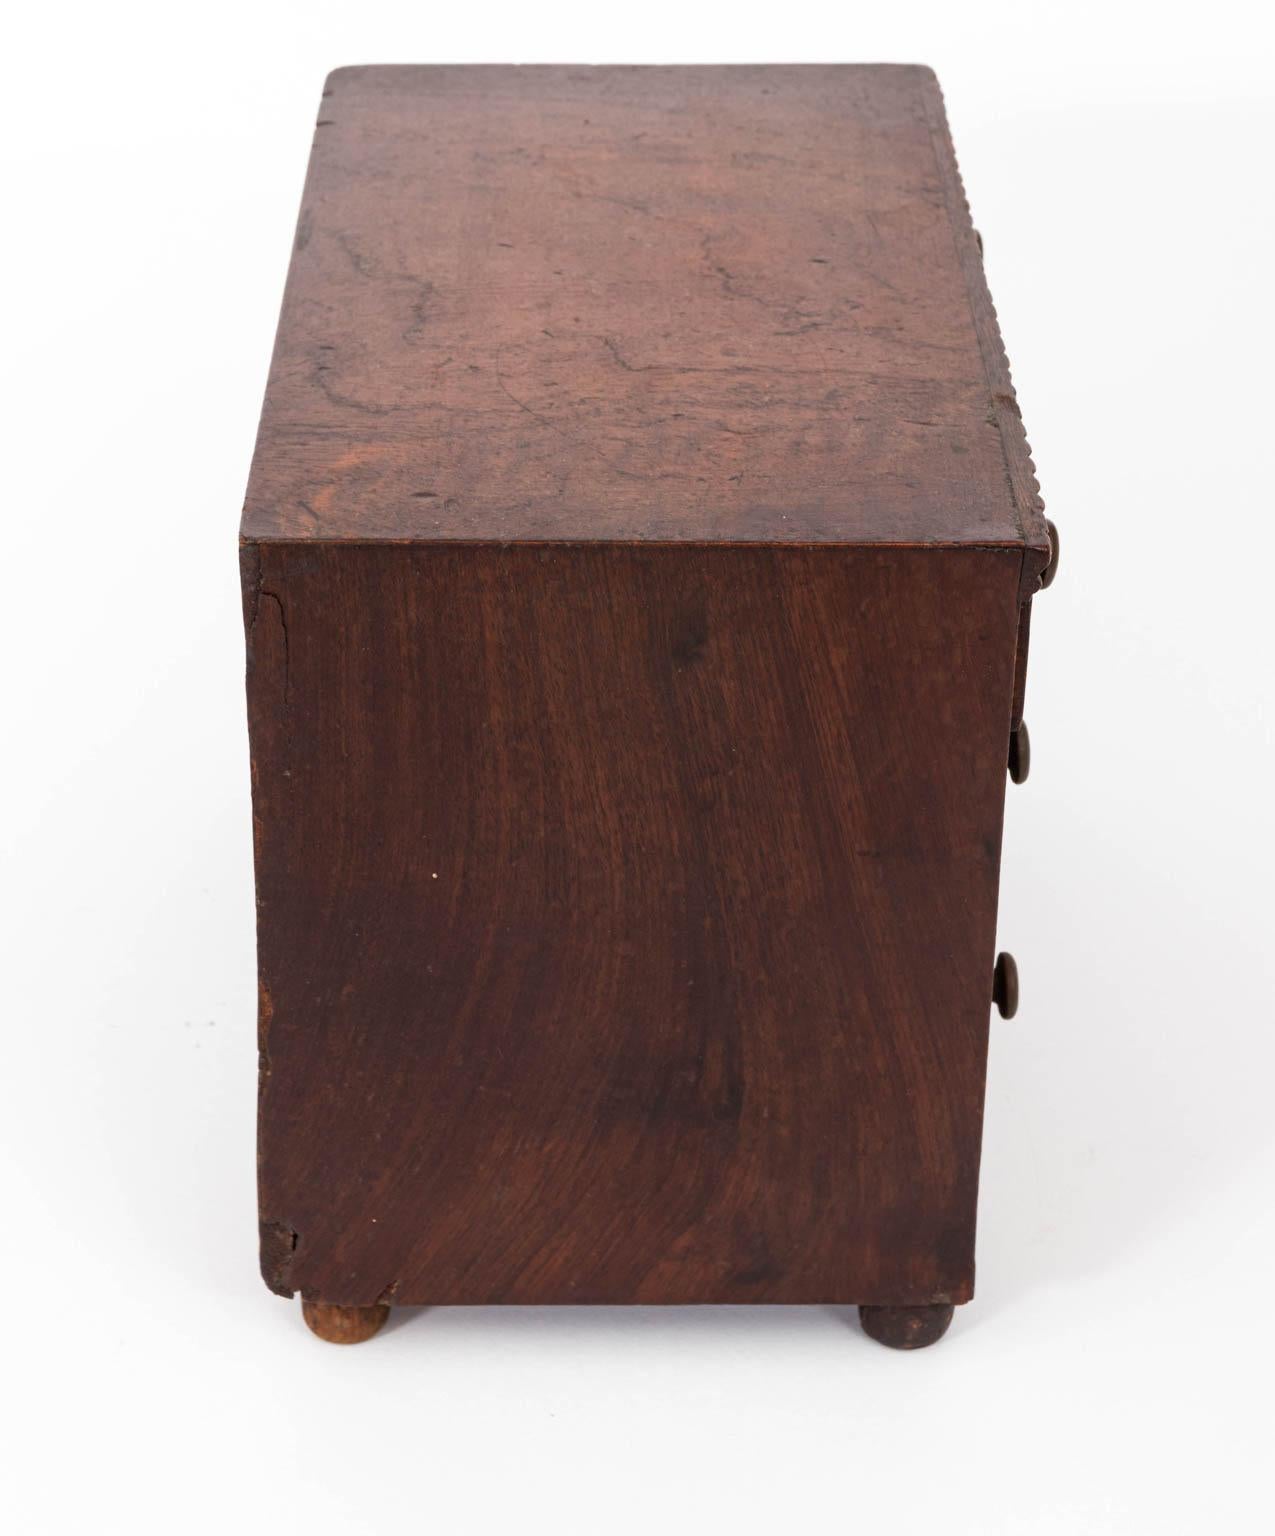 Federal style American mahogany specimen cabinet with thirty butterfly specimens under a glass top, circa 1835. Made in the United States. Please note of wear consistent with age including wood loss and finish loss to the cabinet.